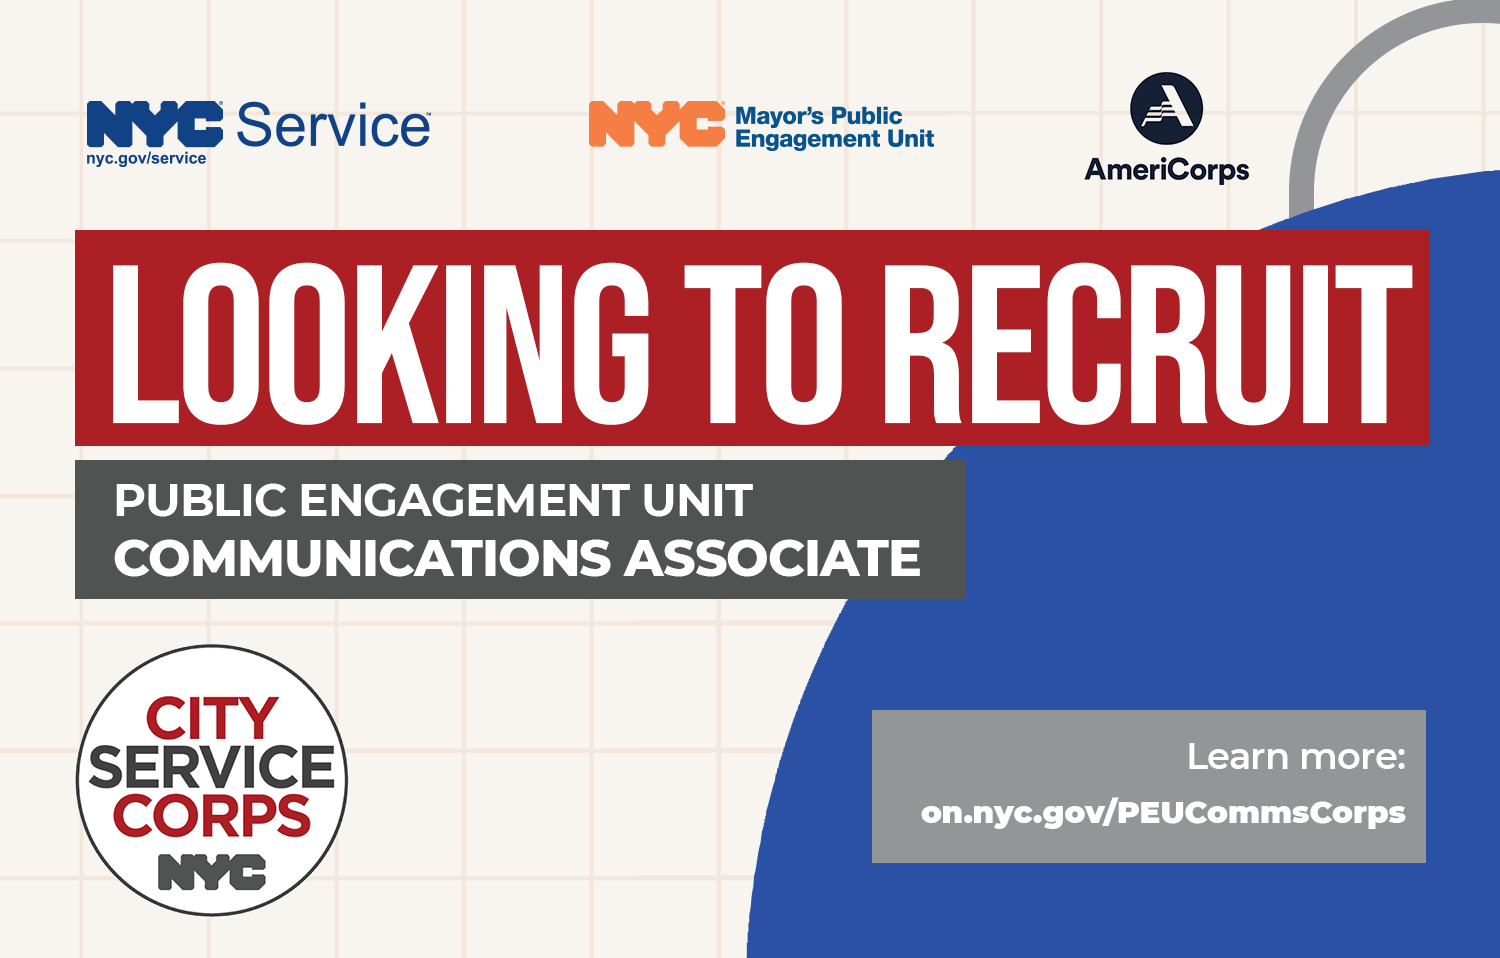 AmeriCorps PEU is Looking to Recruit: Communications Associate
                                           